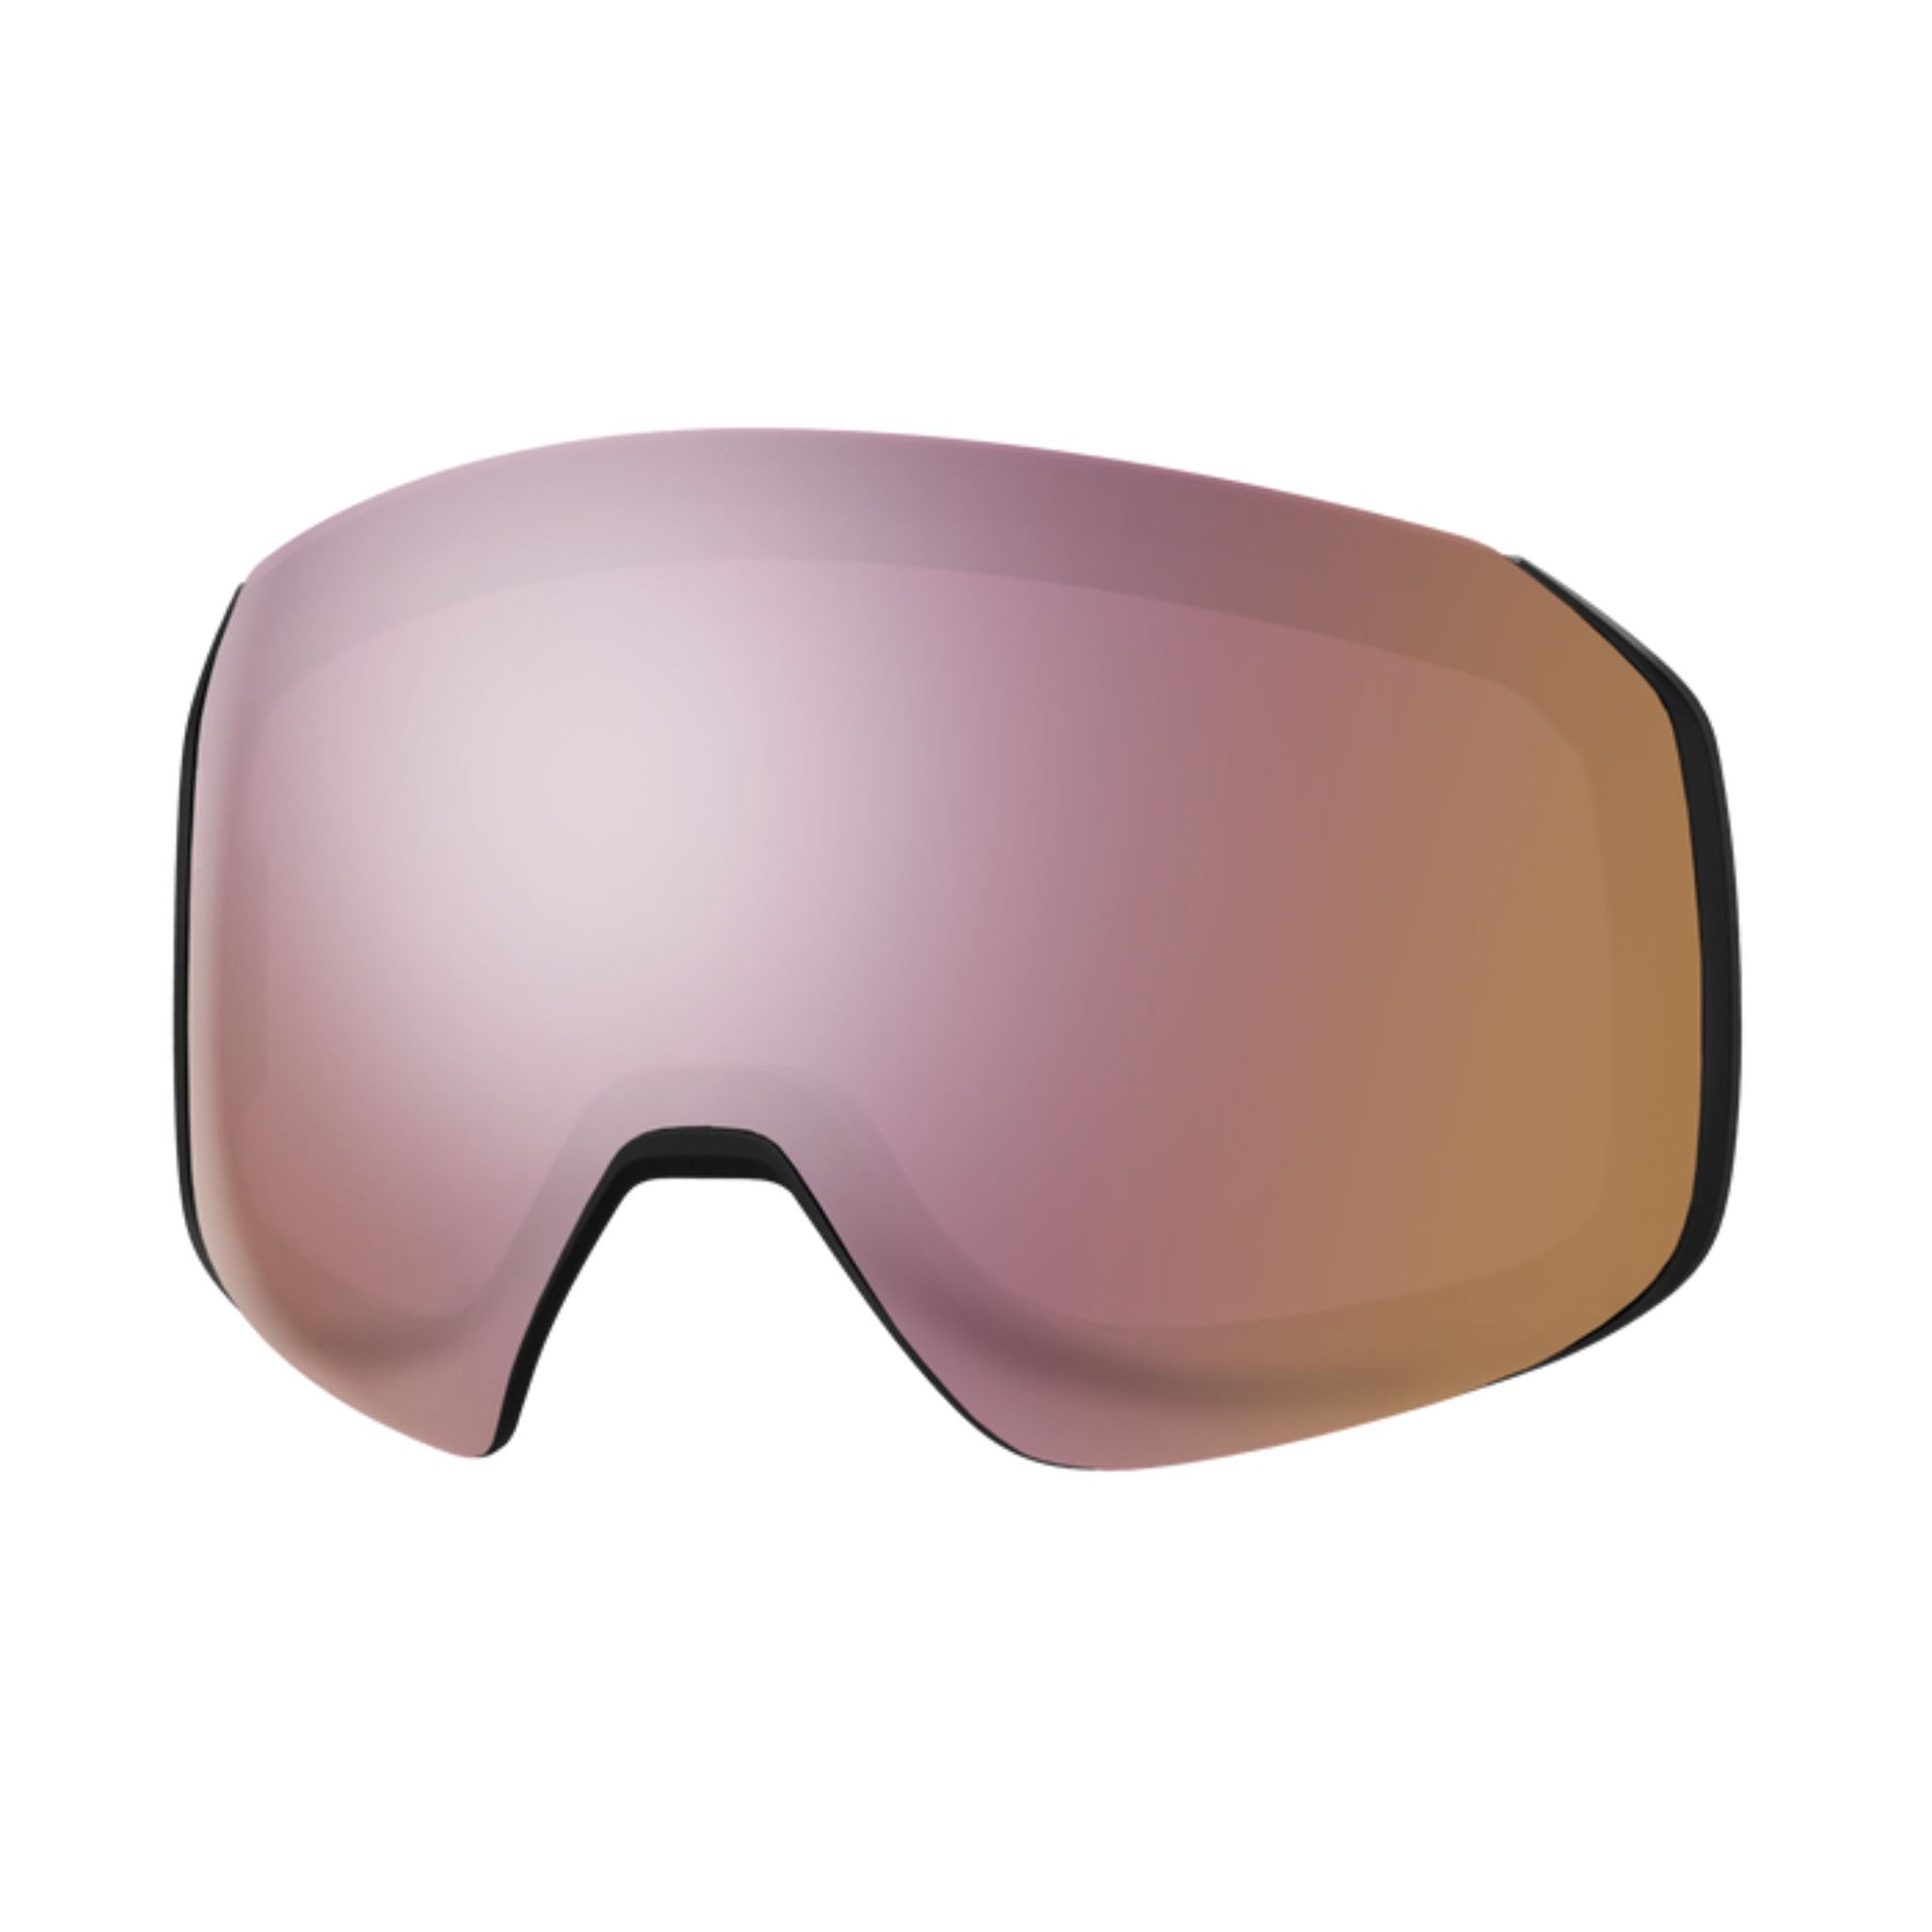 Smith 4D MAG S (Small Fit) Replacement Lens - ChromaPop Everyday Rose Gold Mirror Goggles Smith Optics 